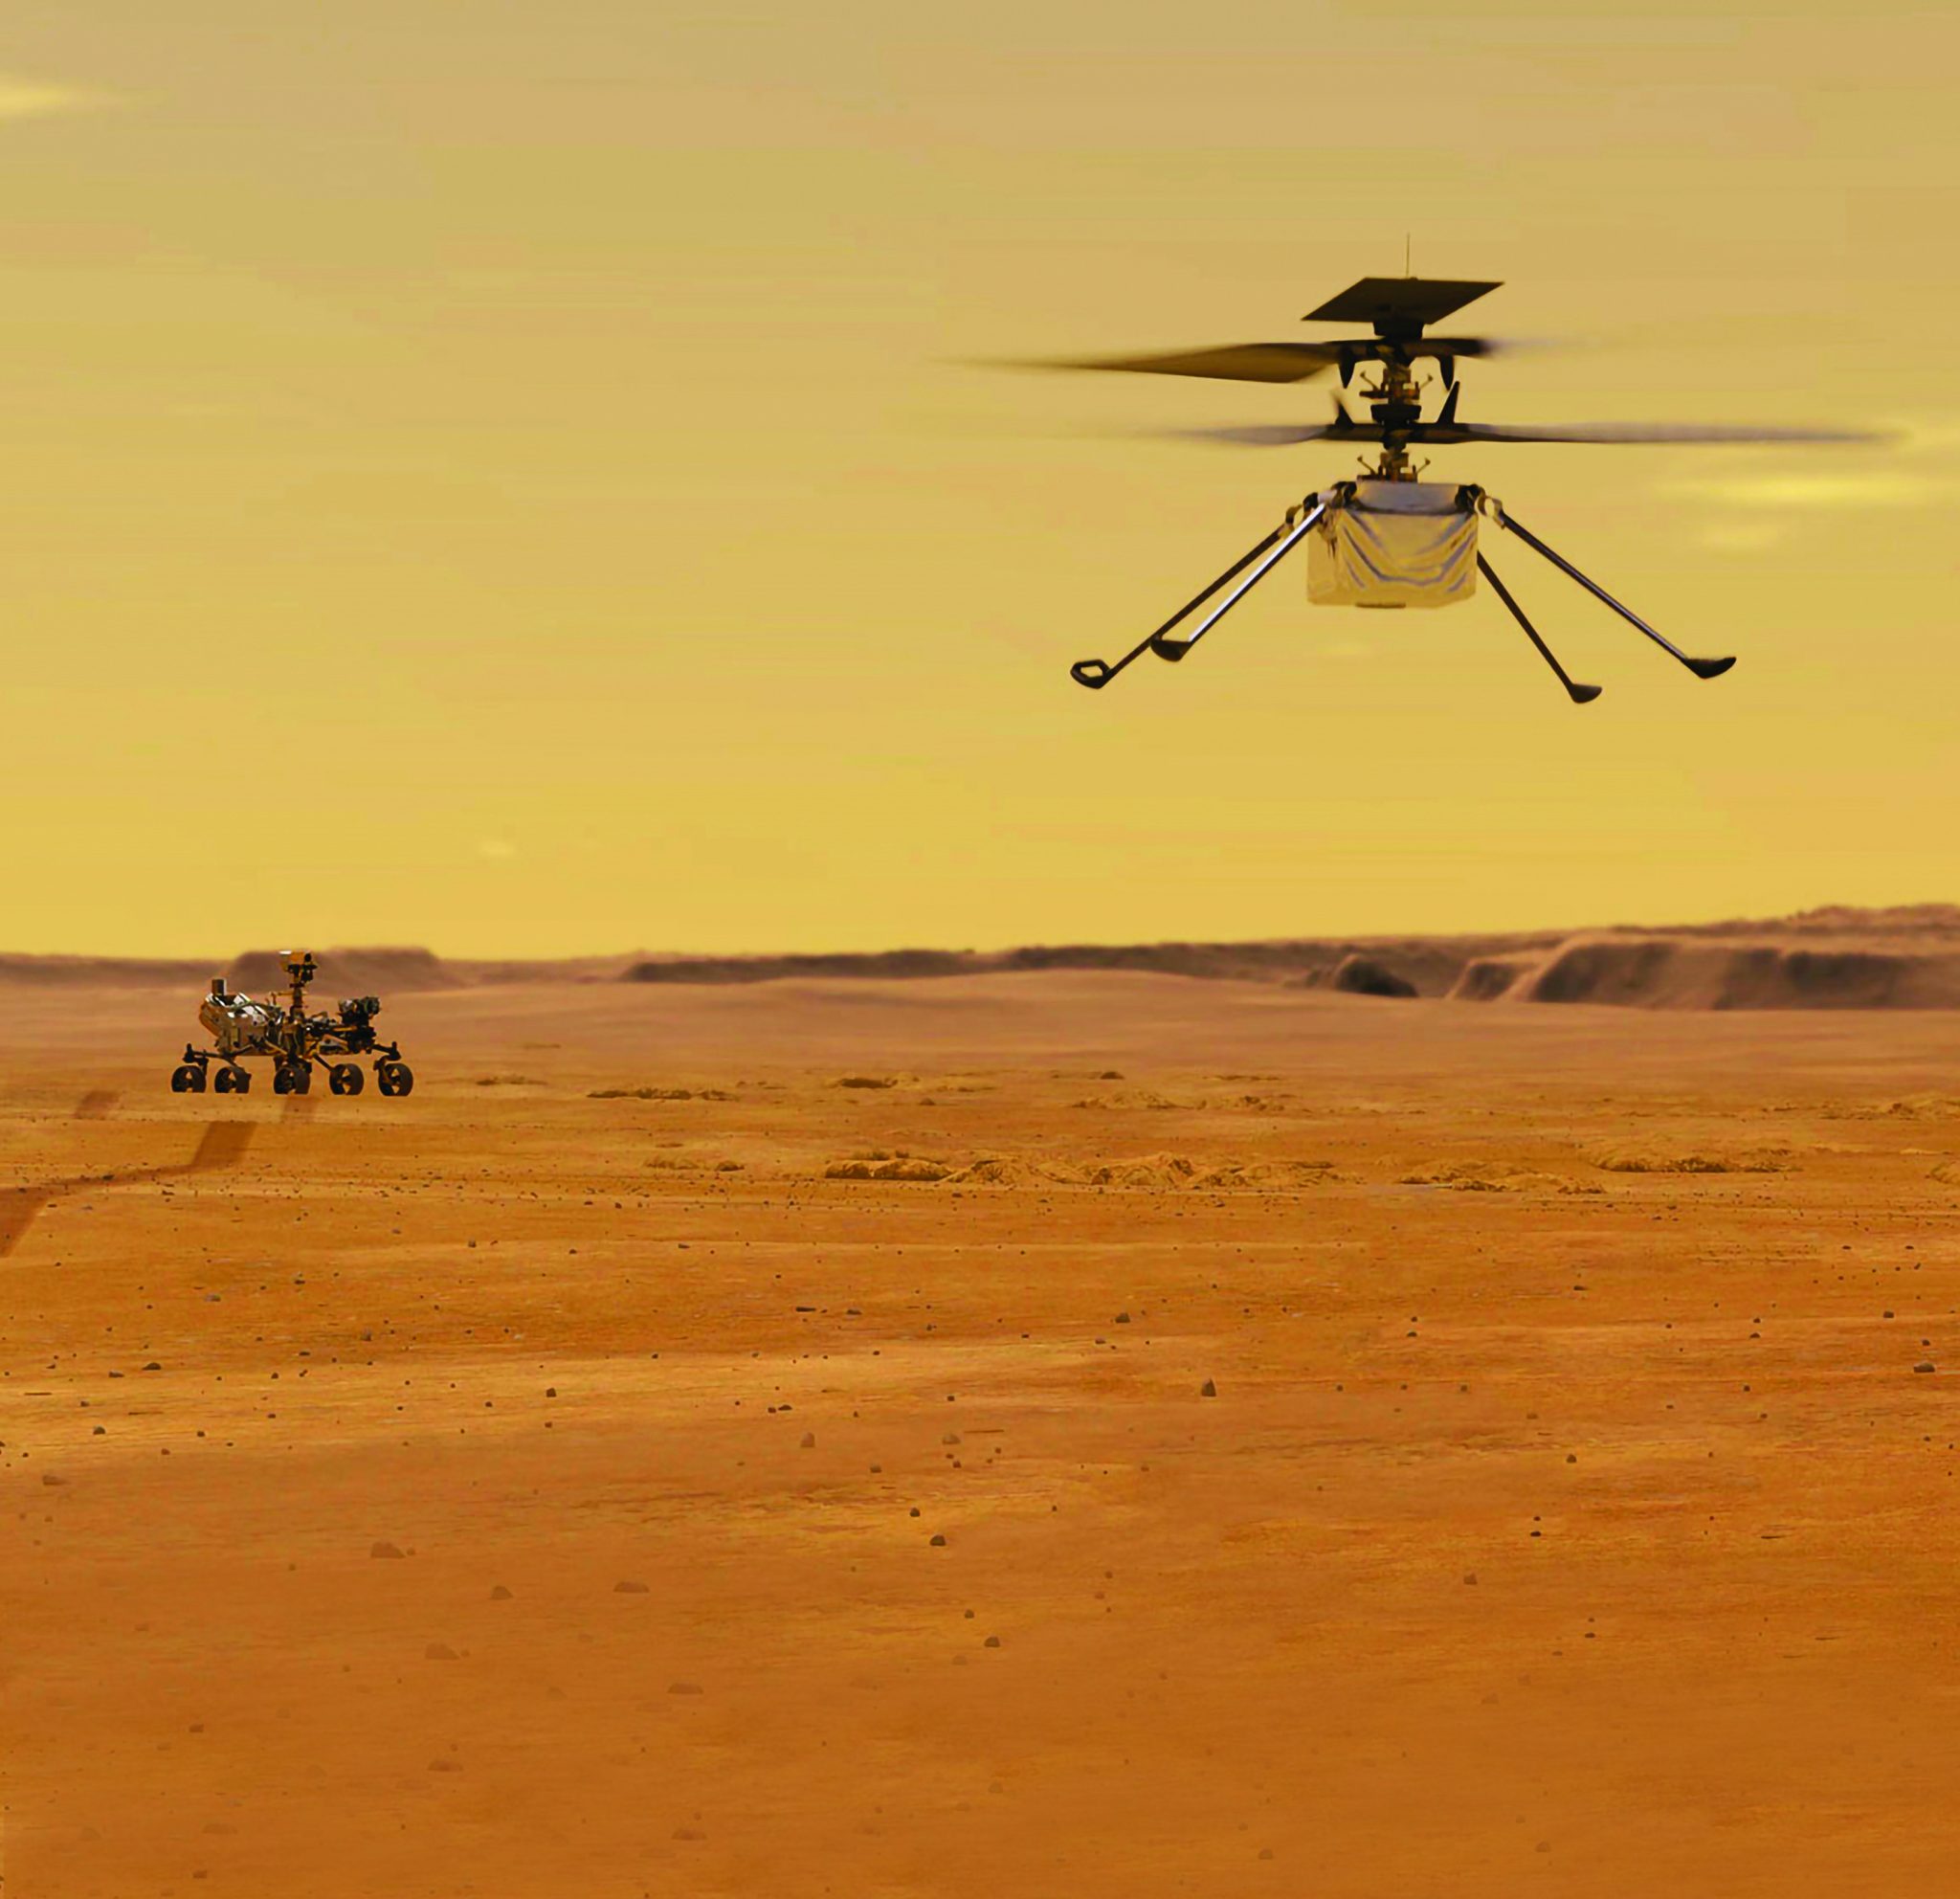 Mission to Mars – NASA’s high-tech RC helicopter